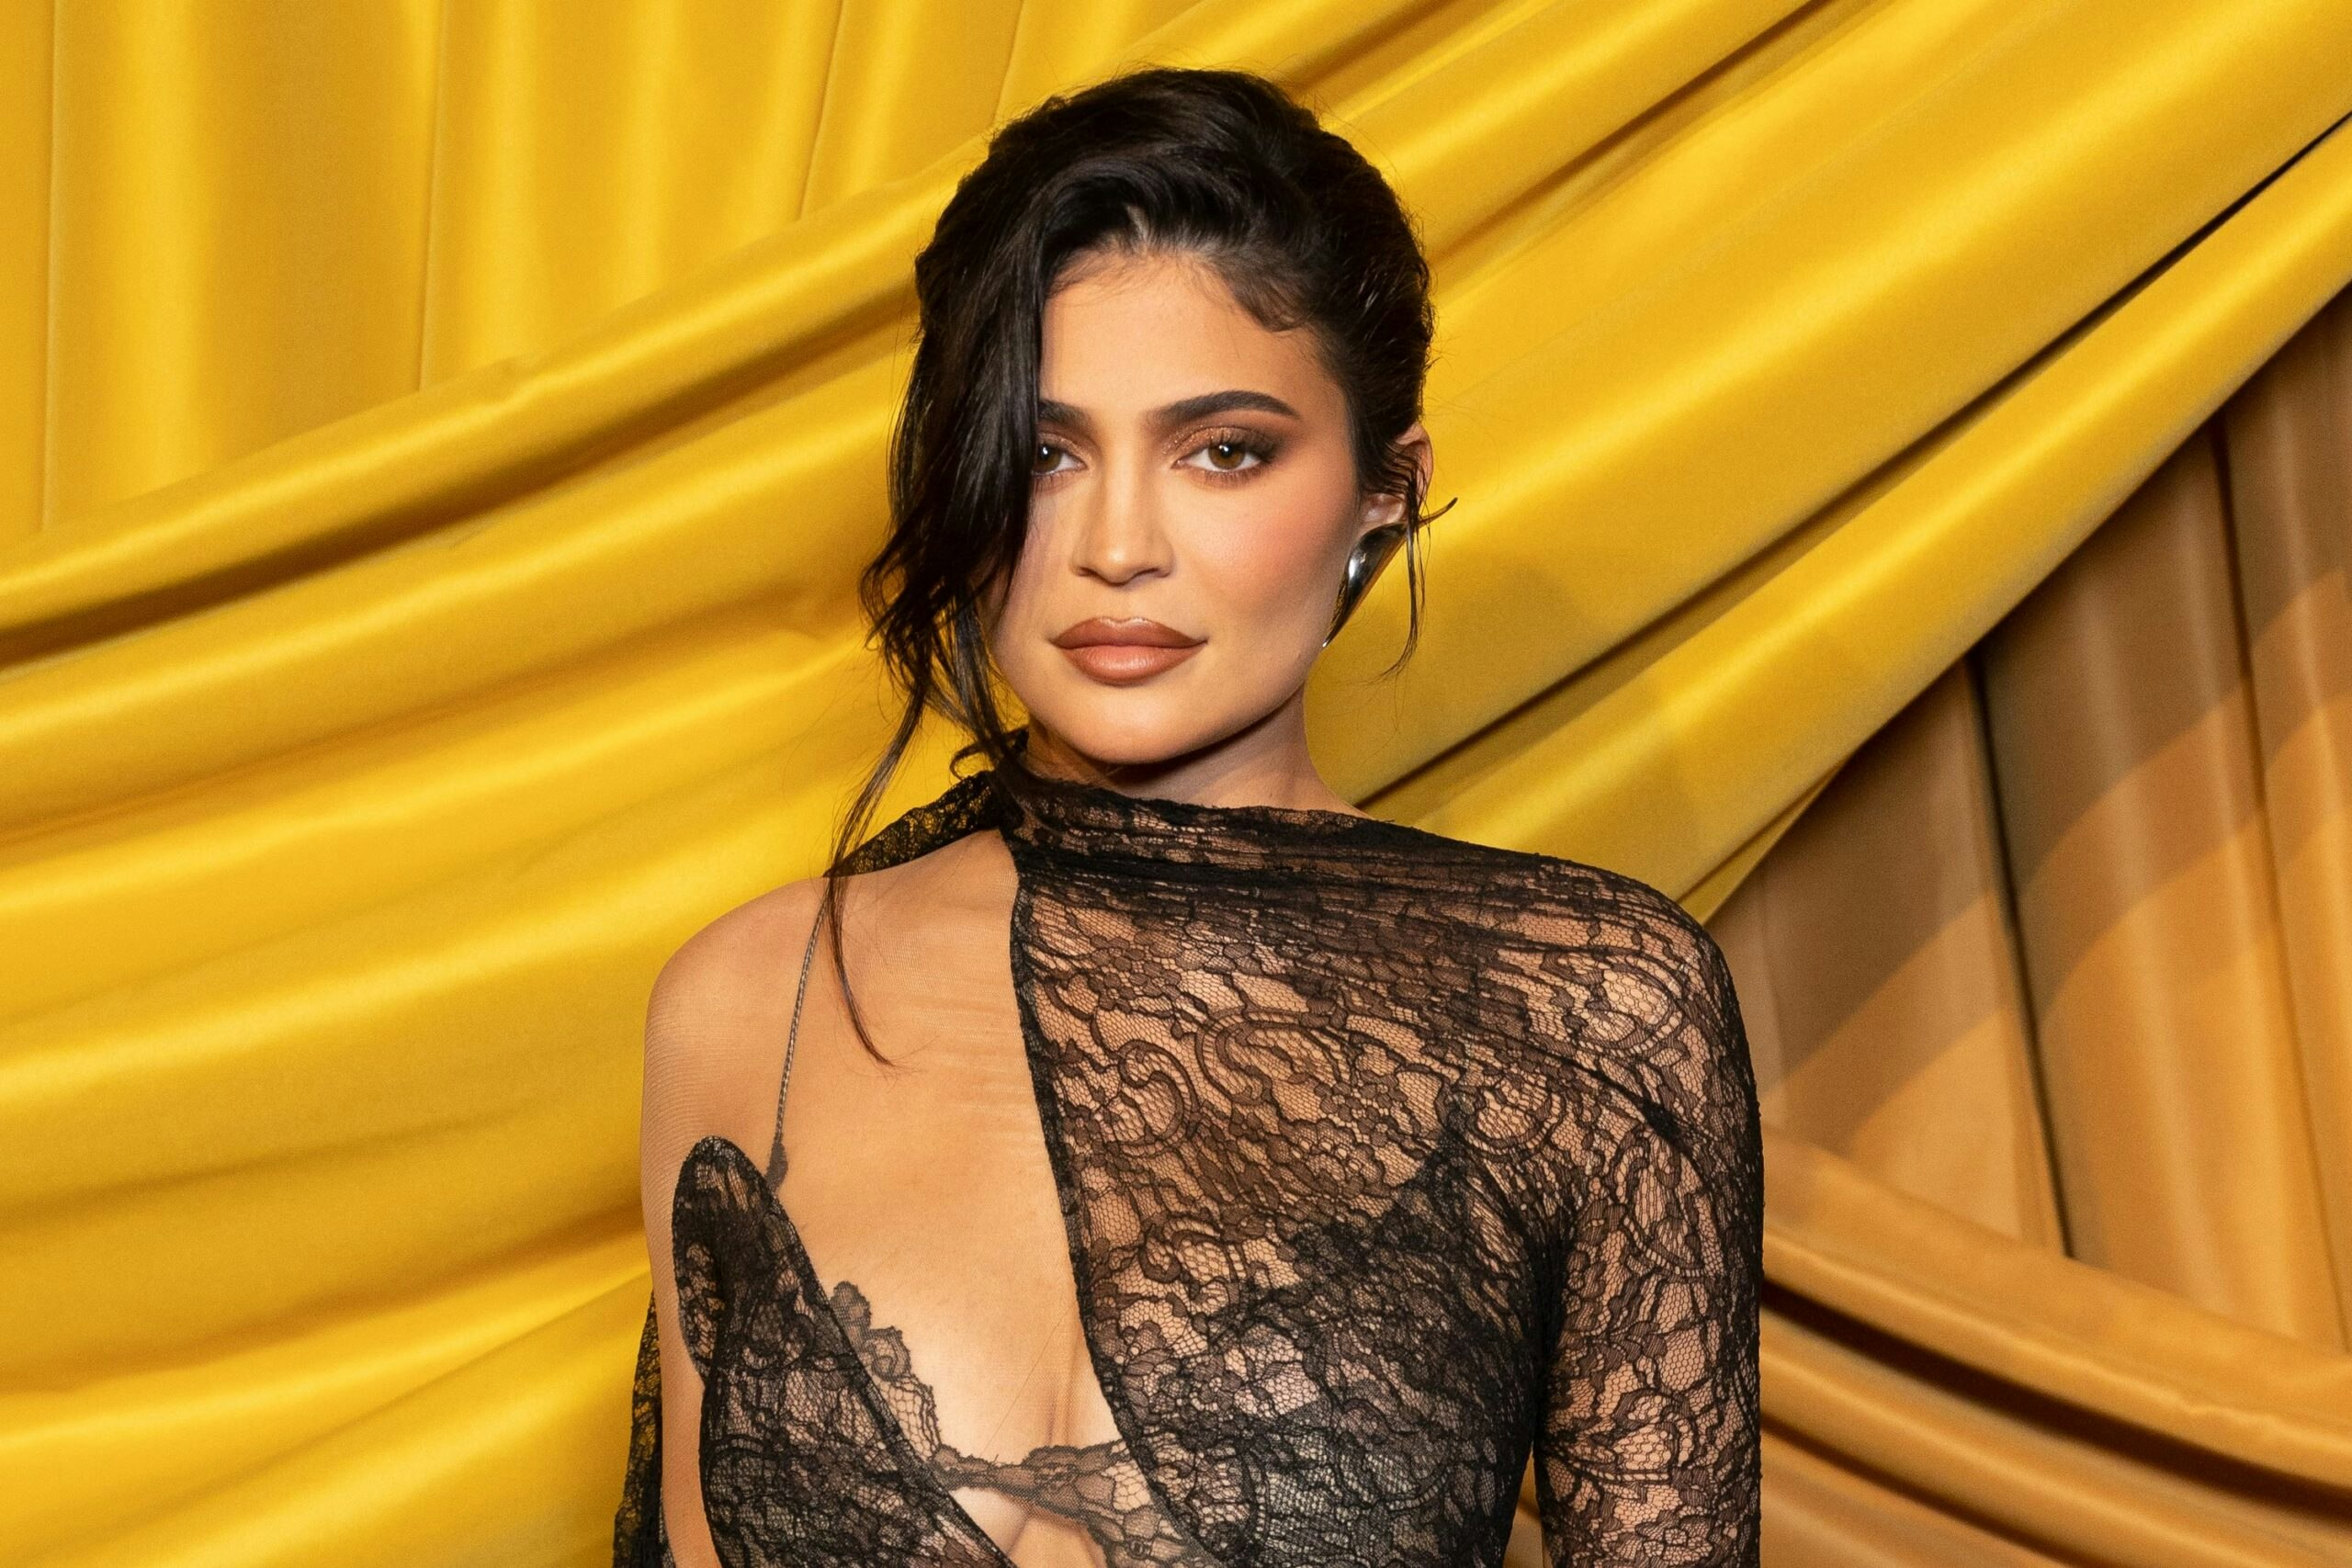 Kylie Jenner Admits She Has Set Impossible Beauty Standards For Other Women